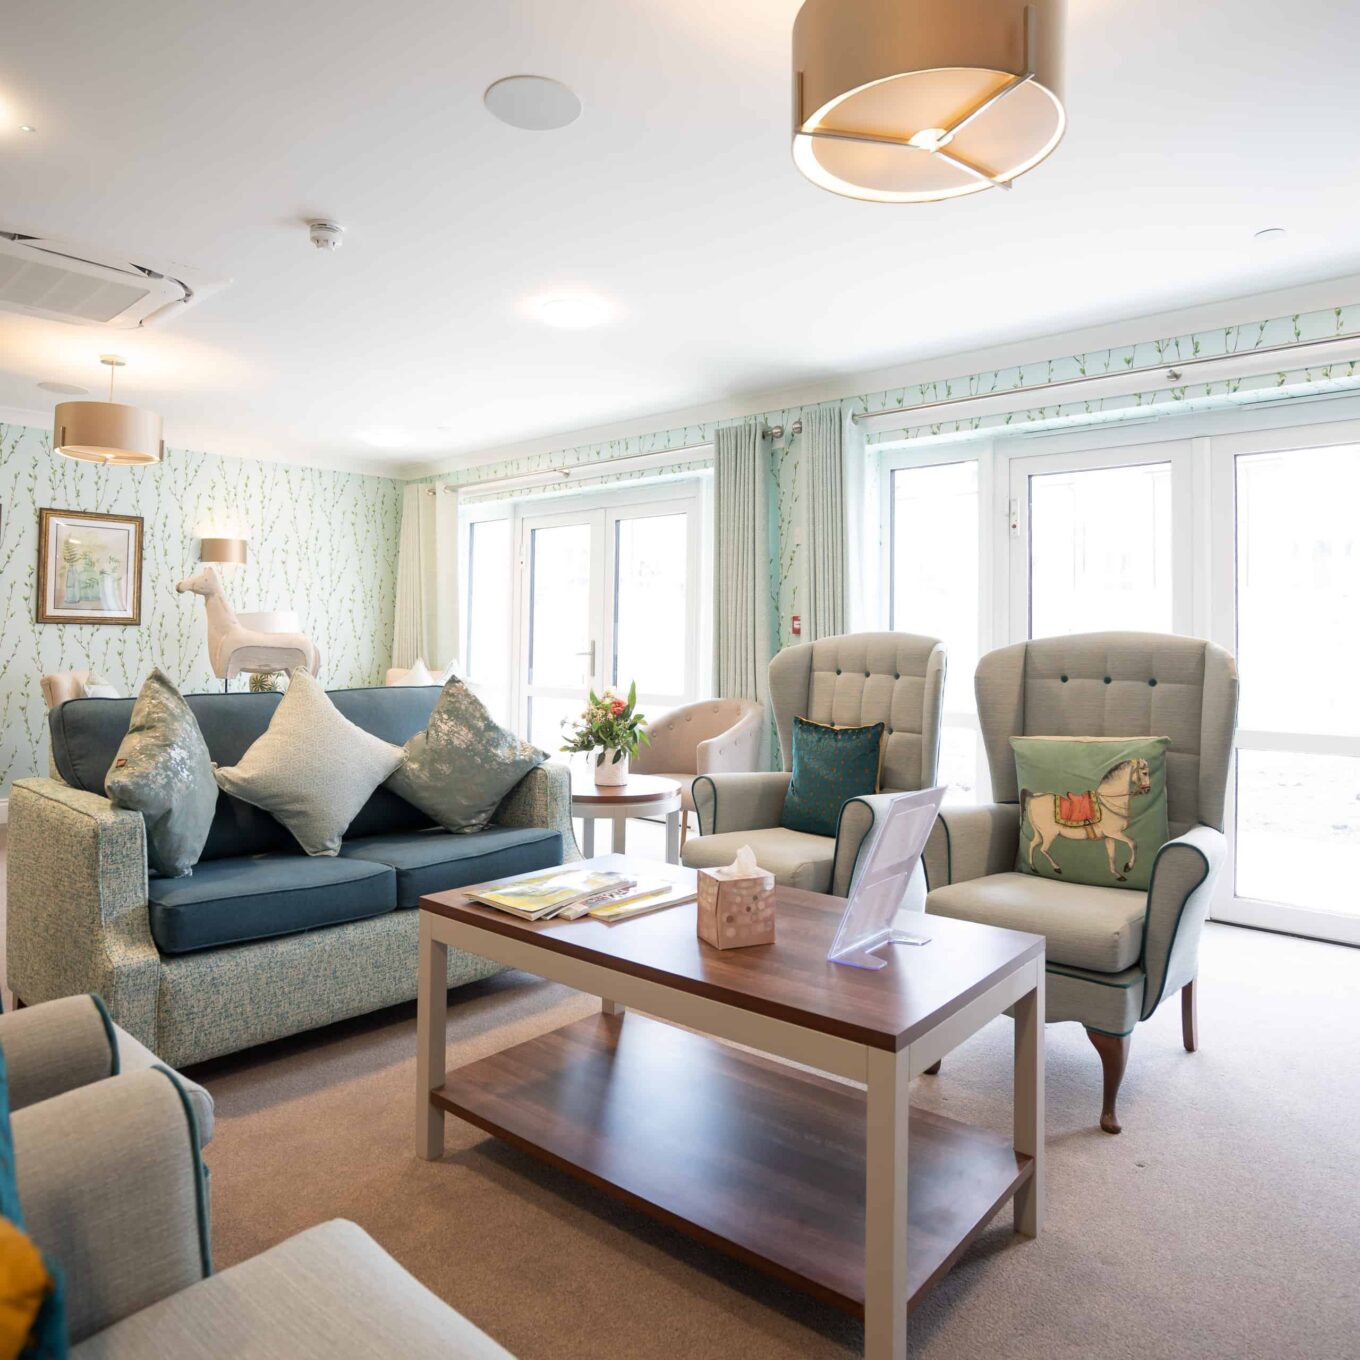 Lounge area with sofa, chairs and coffee table at Elmbrook Court Care Home